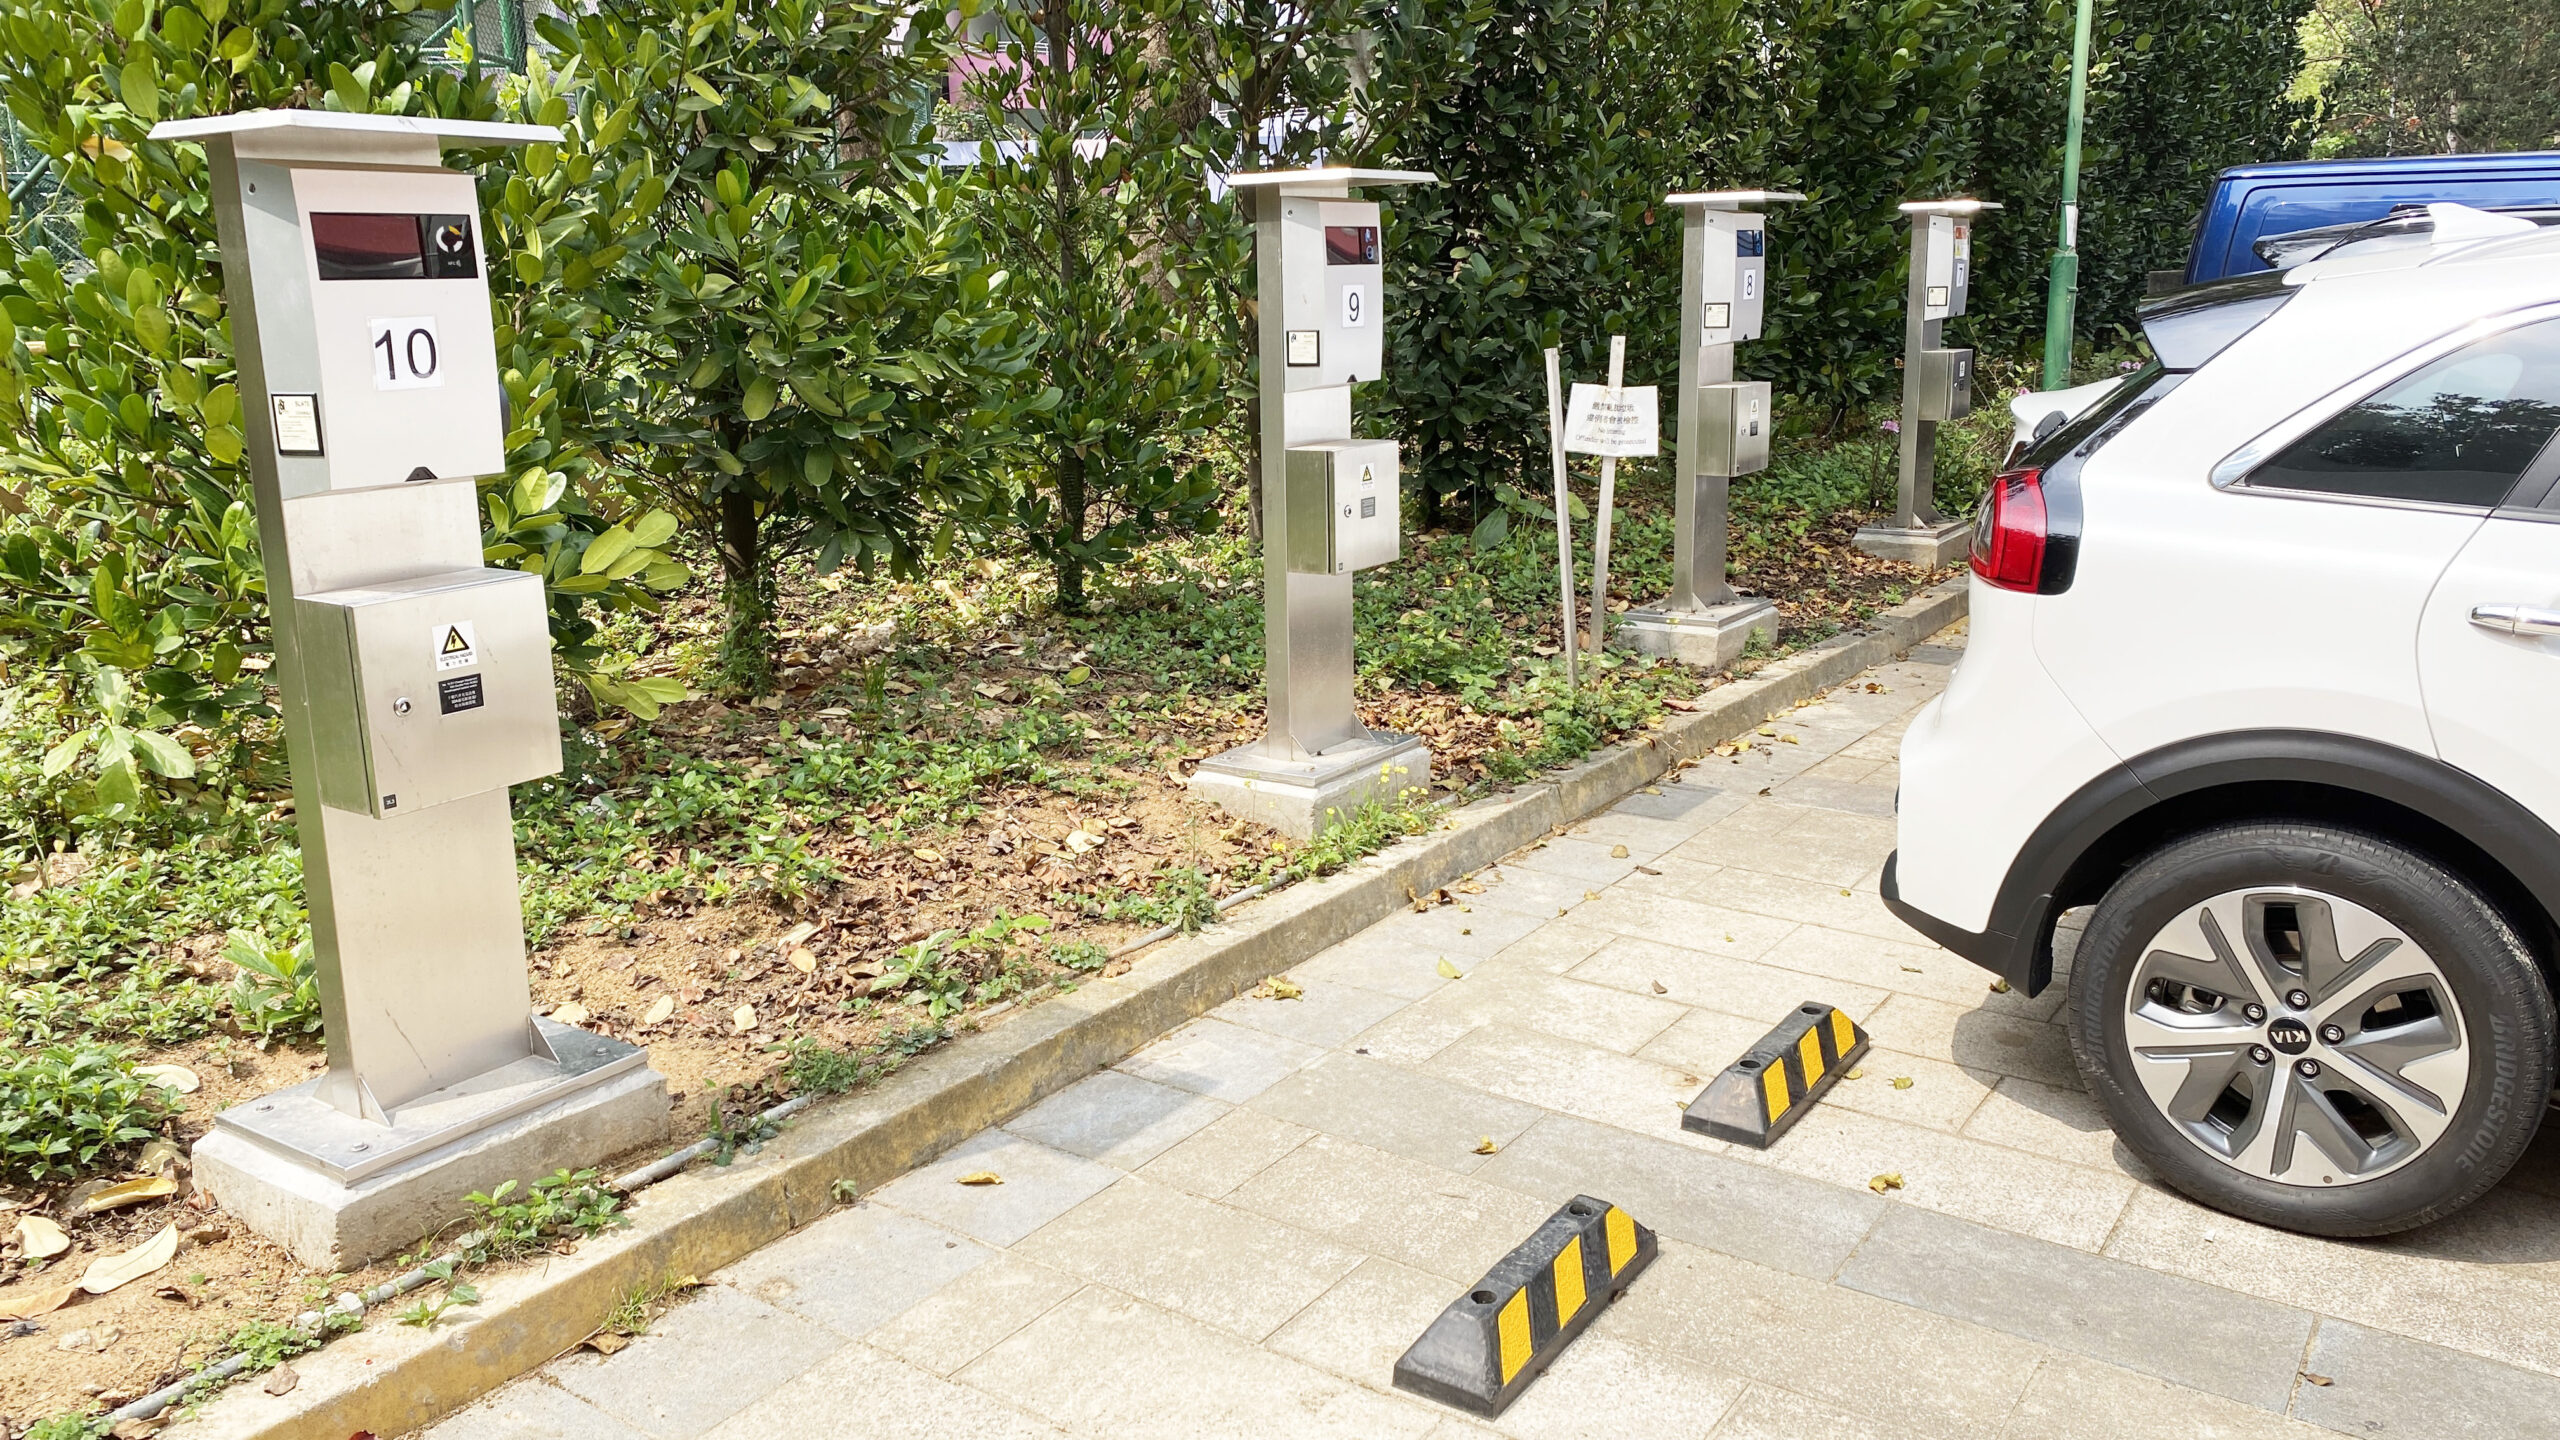 TechApple – Setting up 400 additional charging points at public car parks, malls, public recreational facilities and remote areas